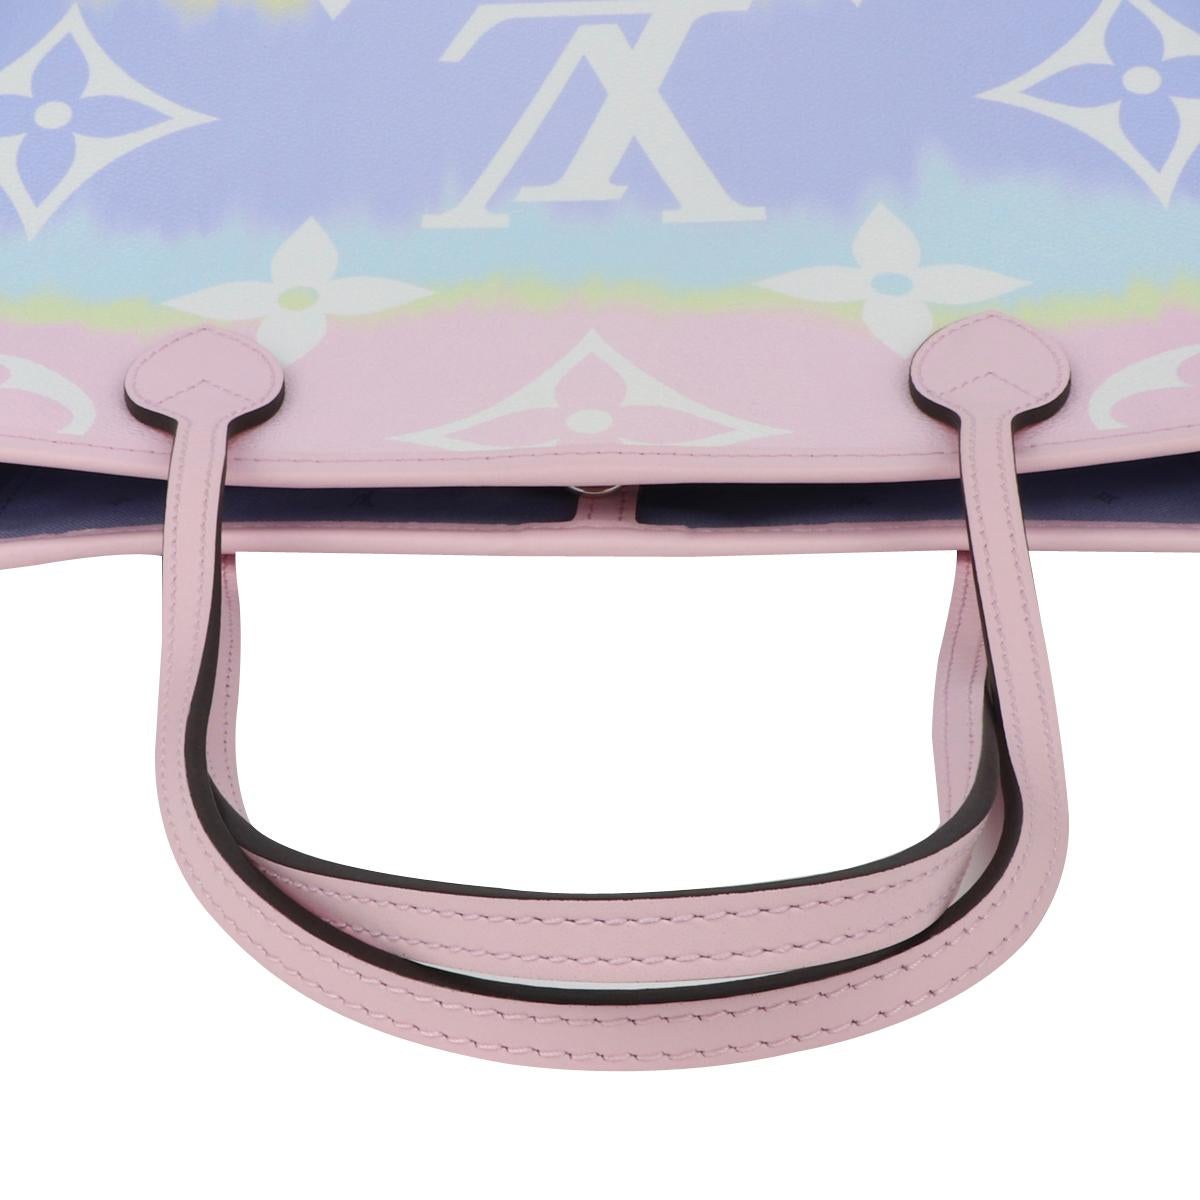 Louis Vuitton Escale Neverfull MM Bag in Pastel 2020 Limited Edition For Sale 4